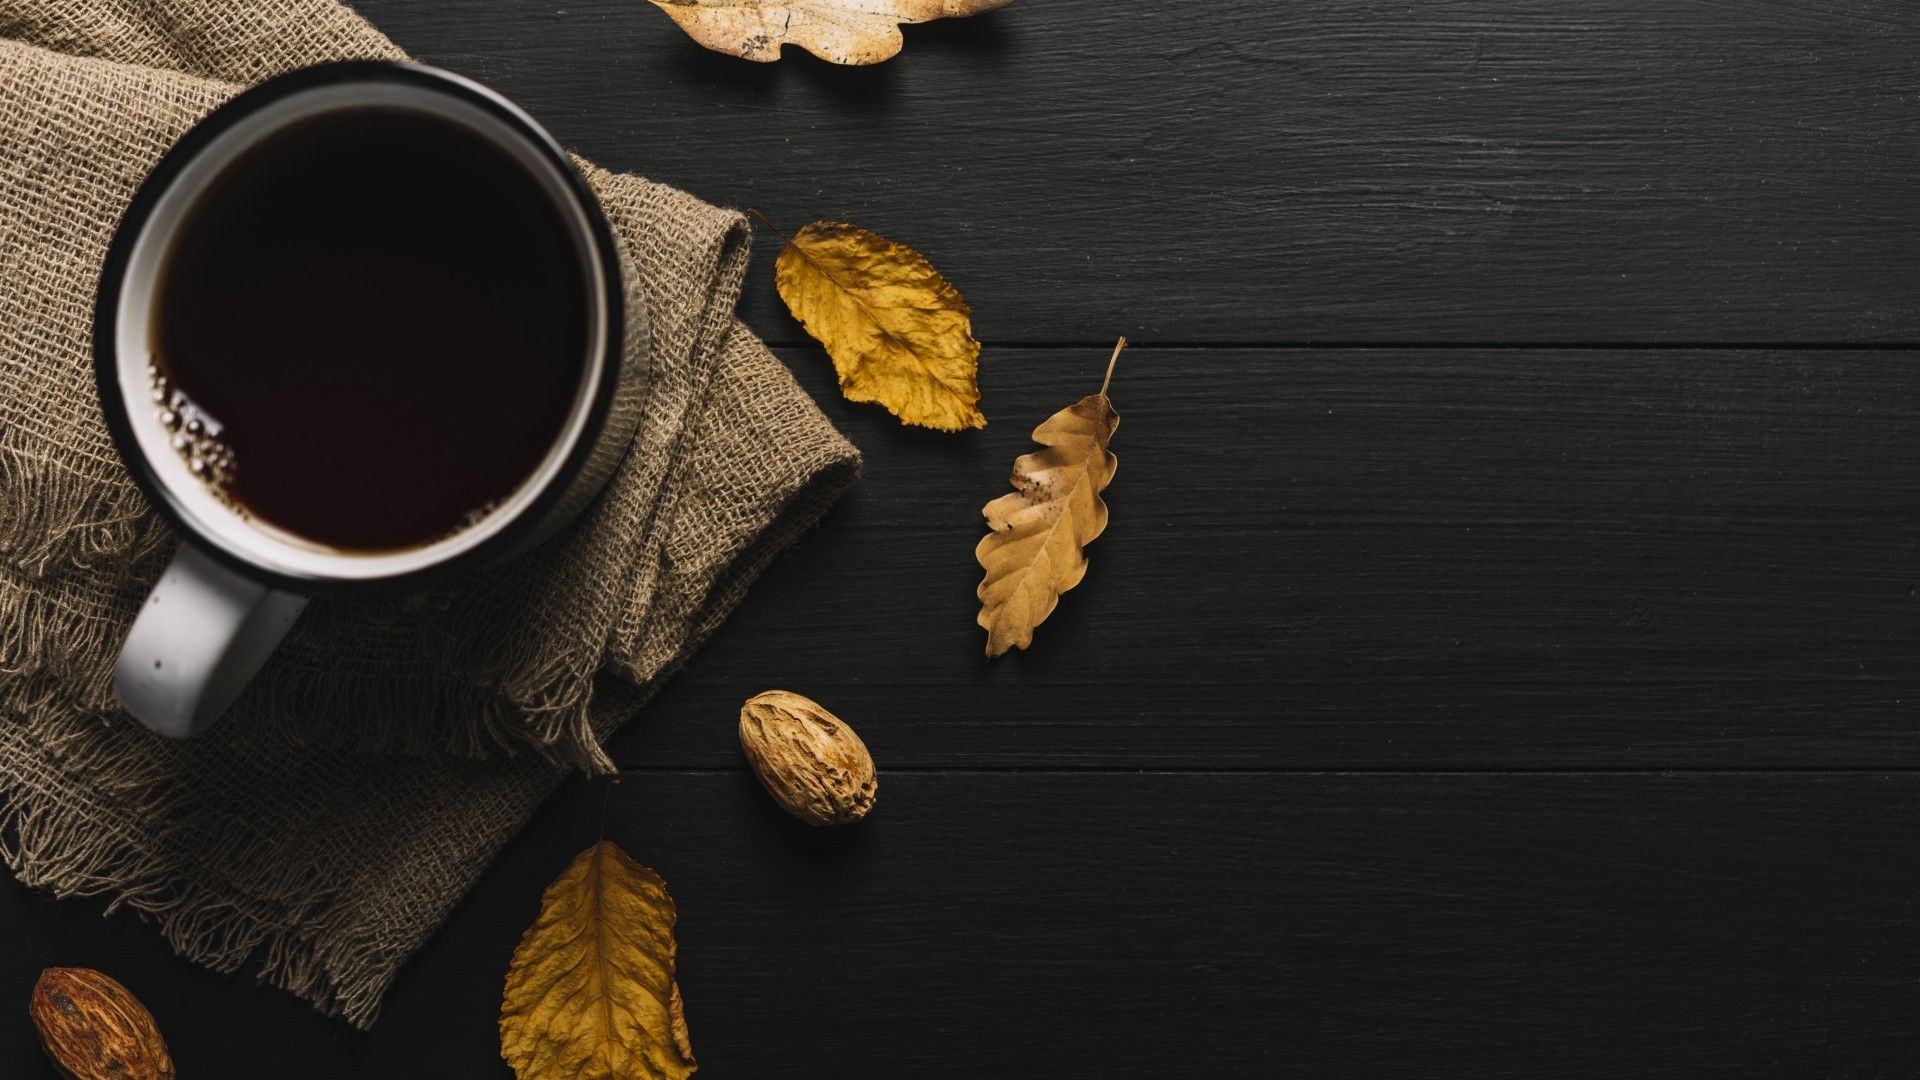 Download 1920x1080 Coffee, Yellow Leaves, Autumn, Cozy, Table, Vintage Wallpaper for Widescreen